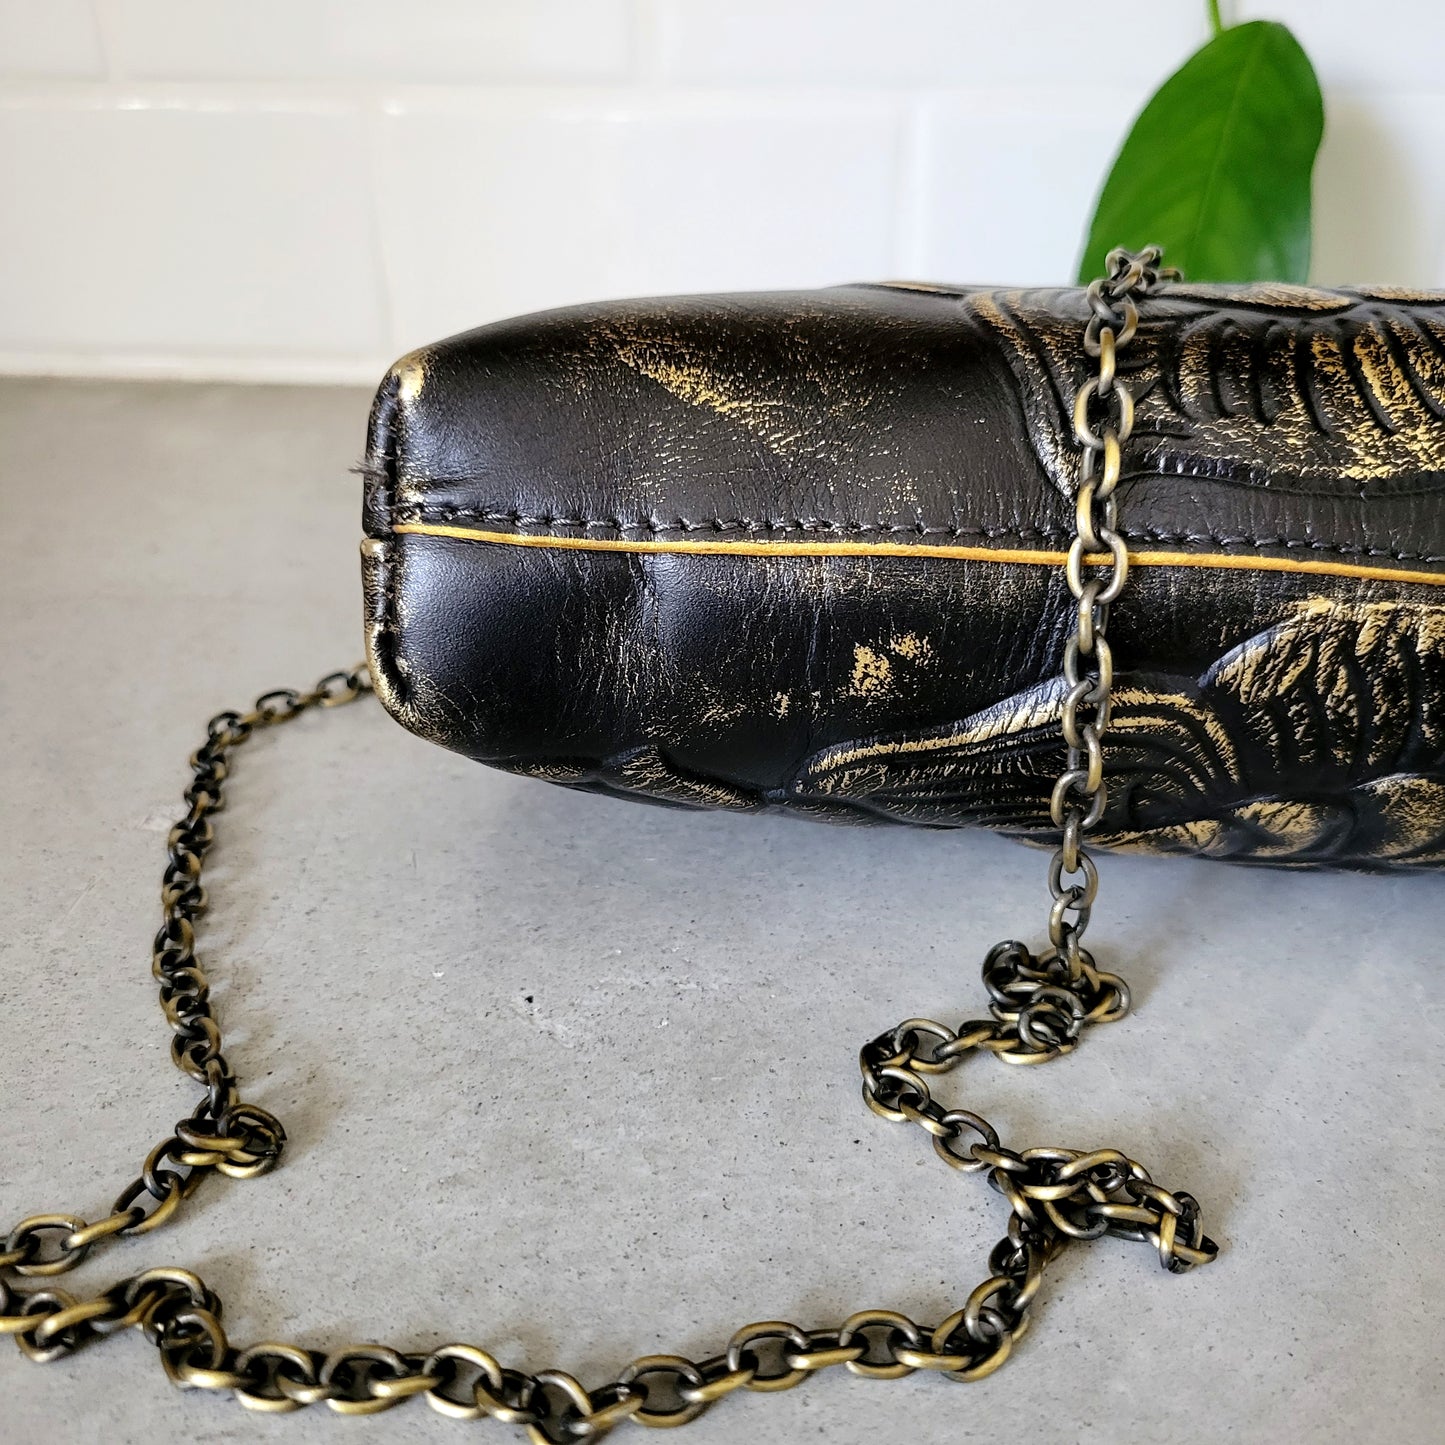 Vintage Patricia Nash Italian Tooled Leather Purse with Metal Strap